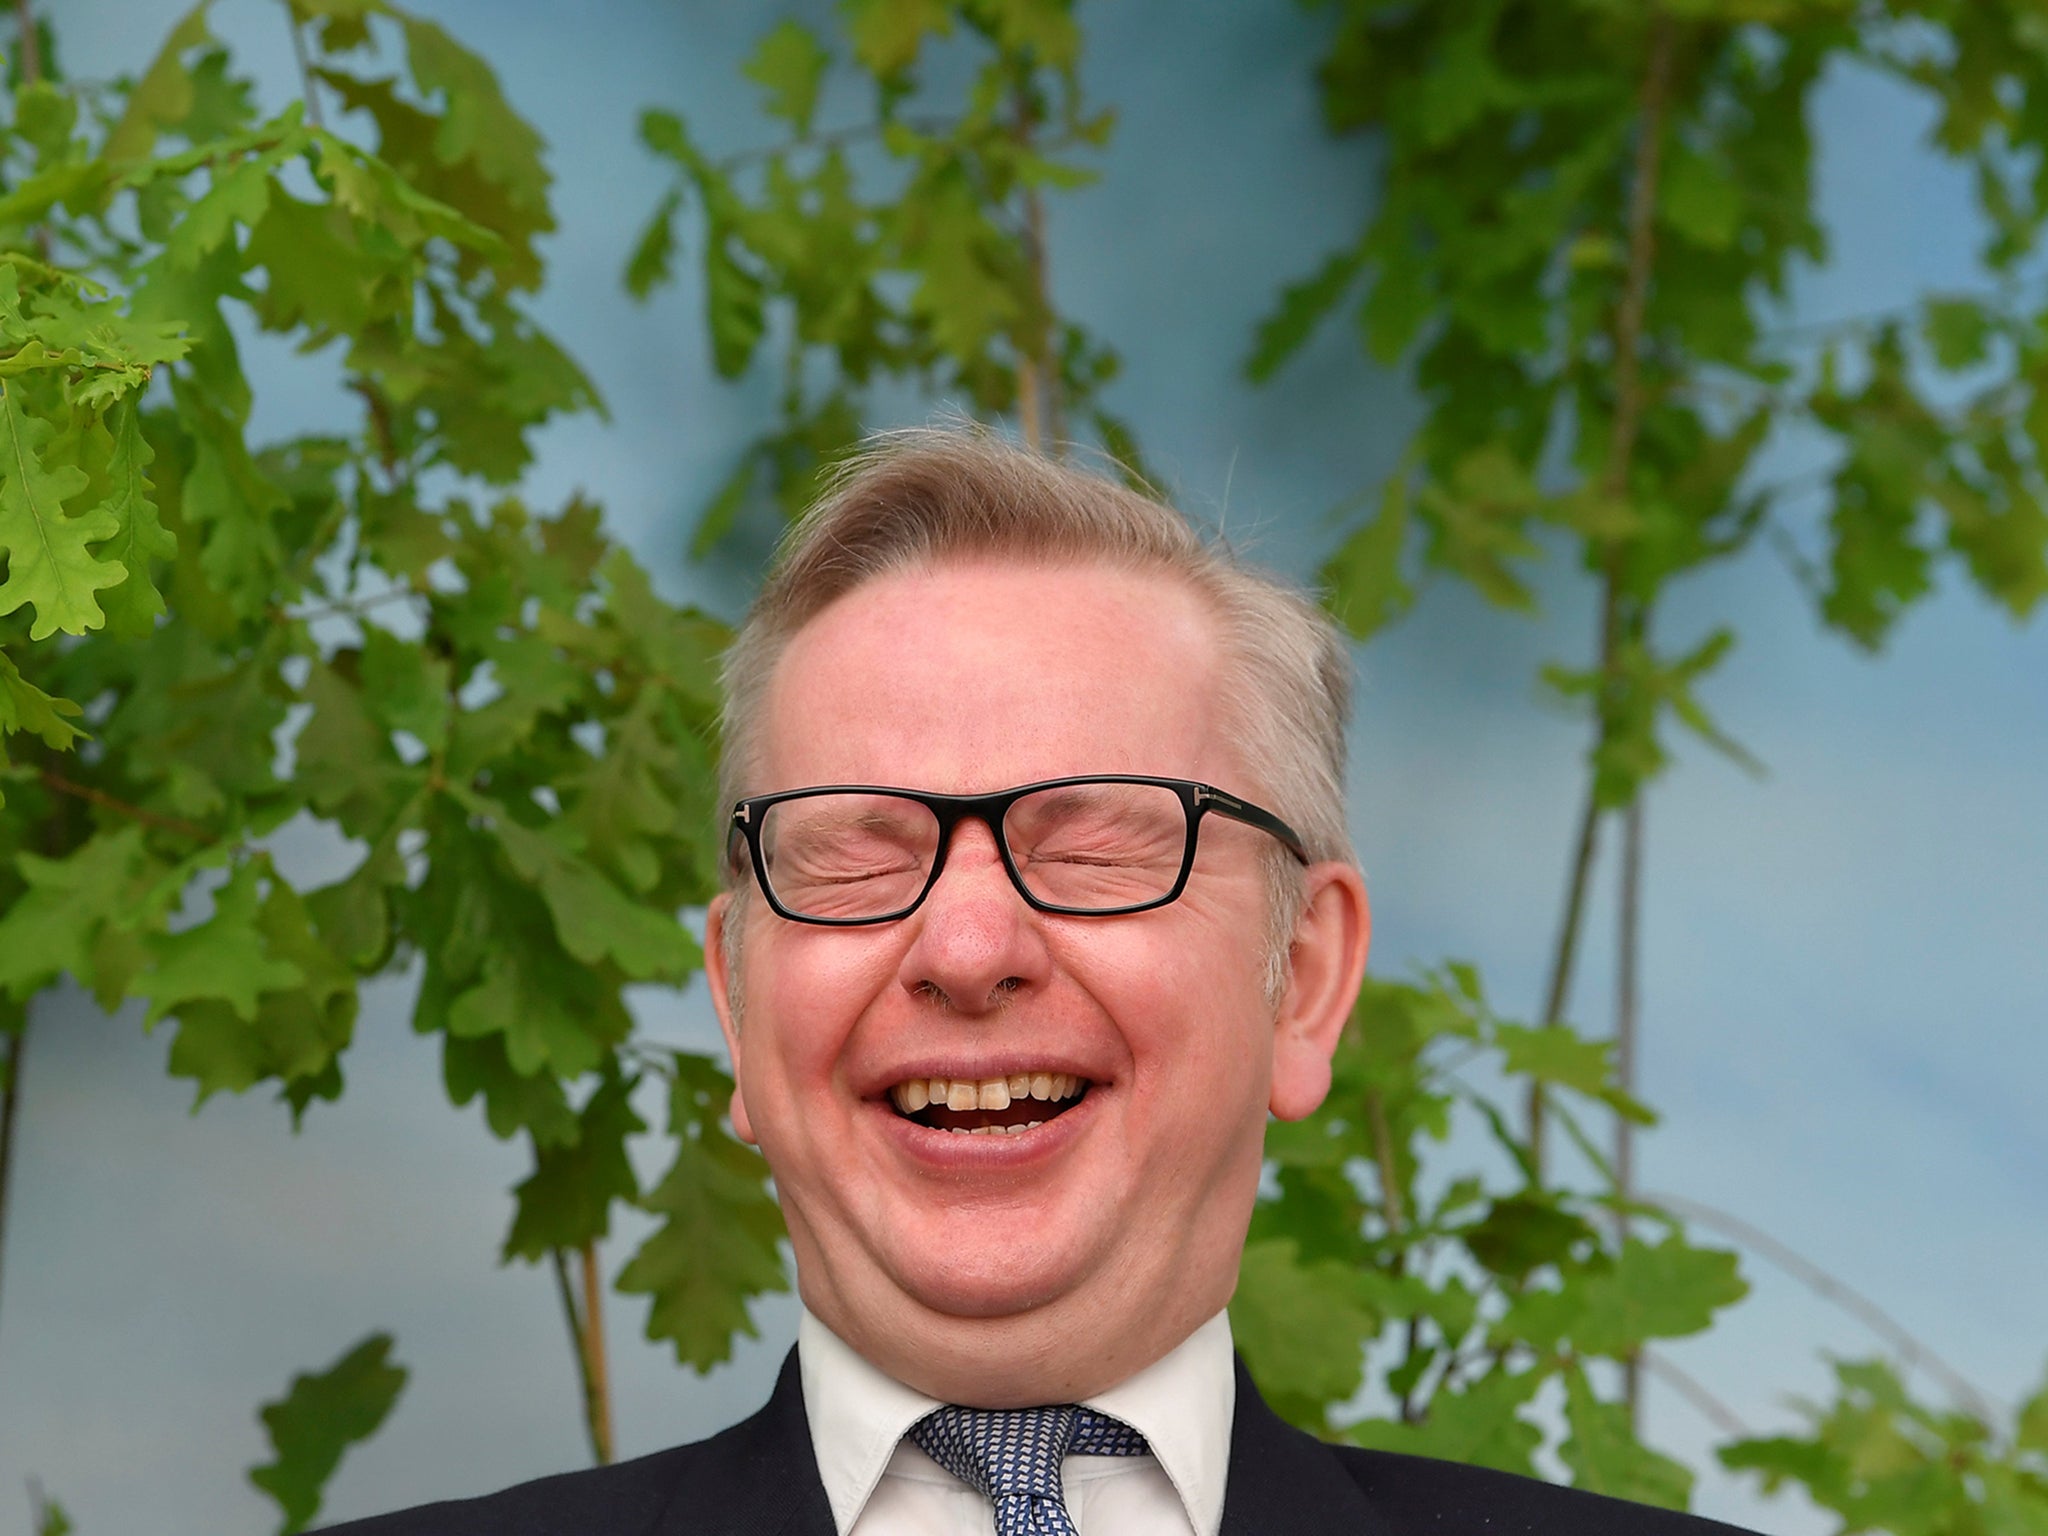 Michael Gove imagines politeness can be used as a cover for wild dishonesty